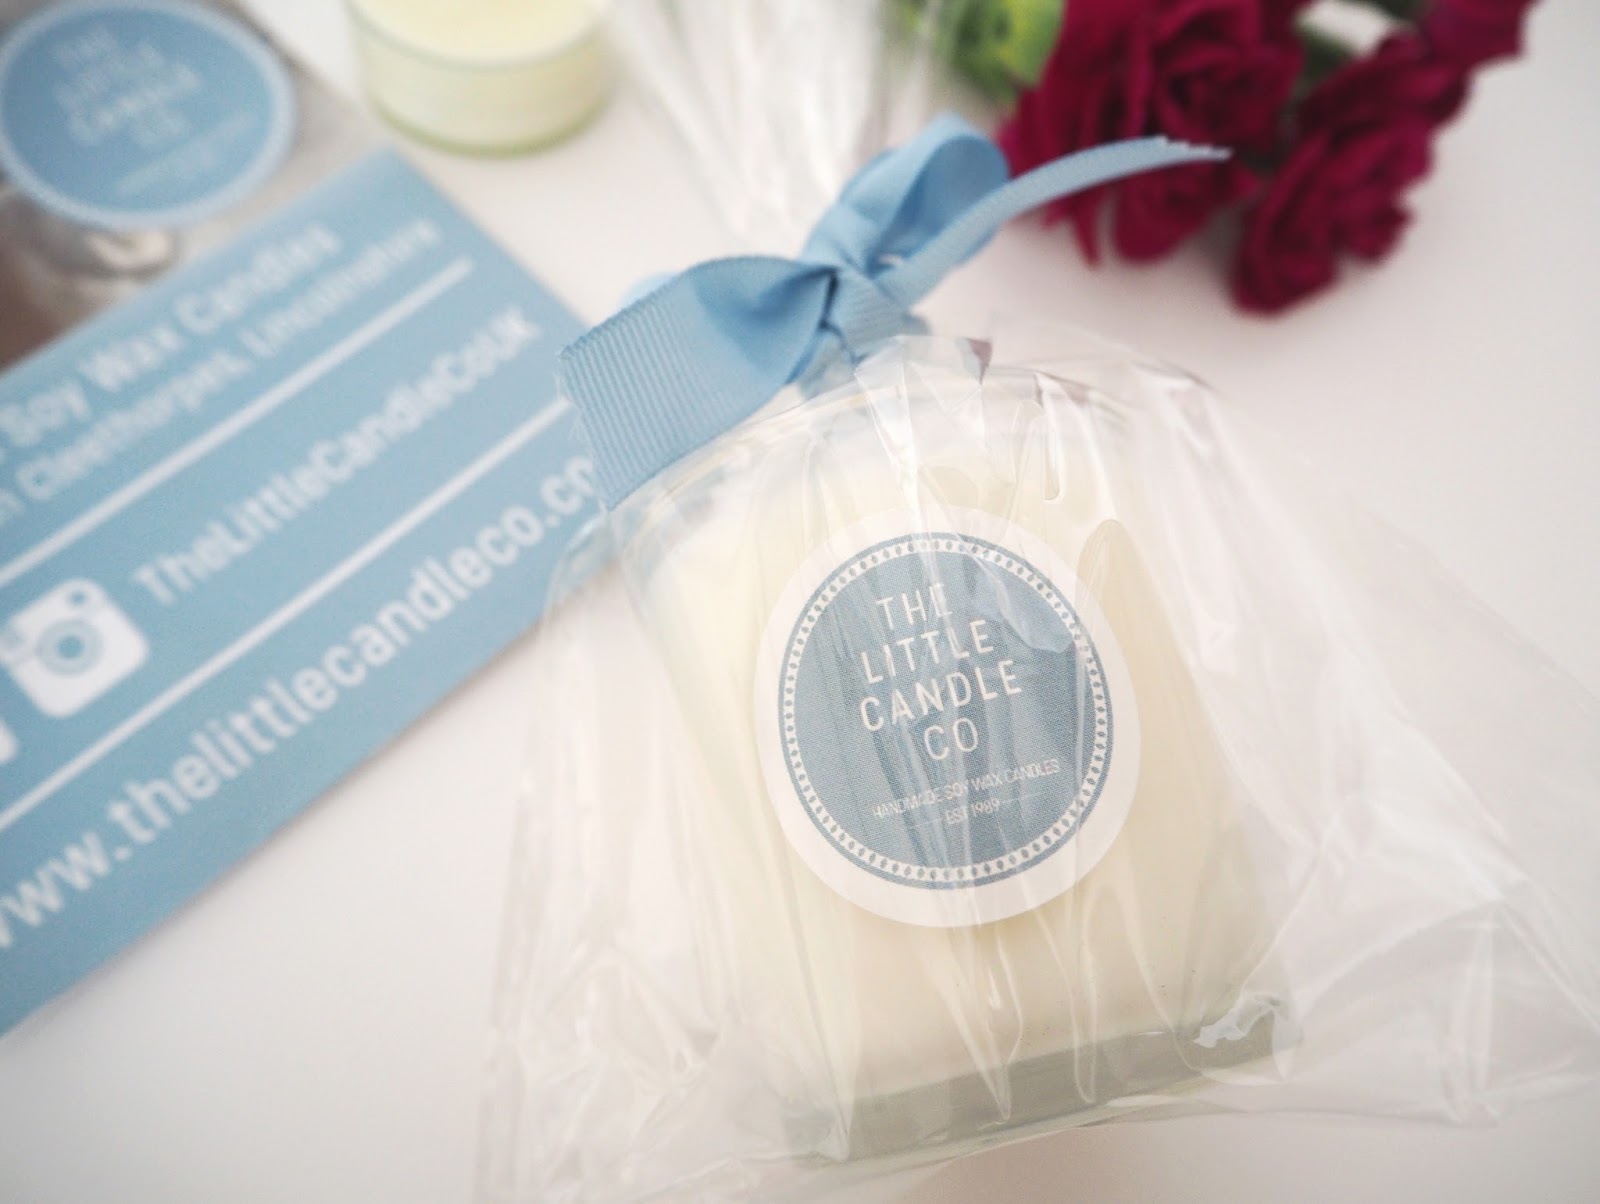 The Little Candle Co, Katie Kirk Loves, Candle Review, Handmade Candles, Handmade in the UK, Fragranced Candles, Handmade Gifts, UK Blogger, Candle Blogger, Lifestyle Blogger